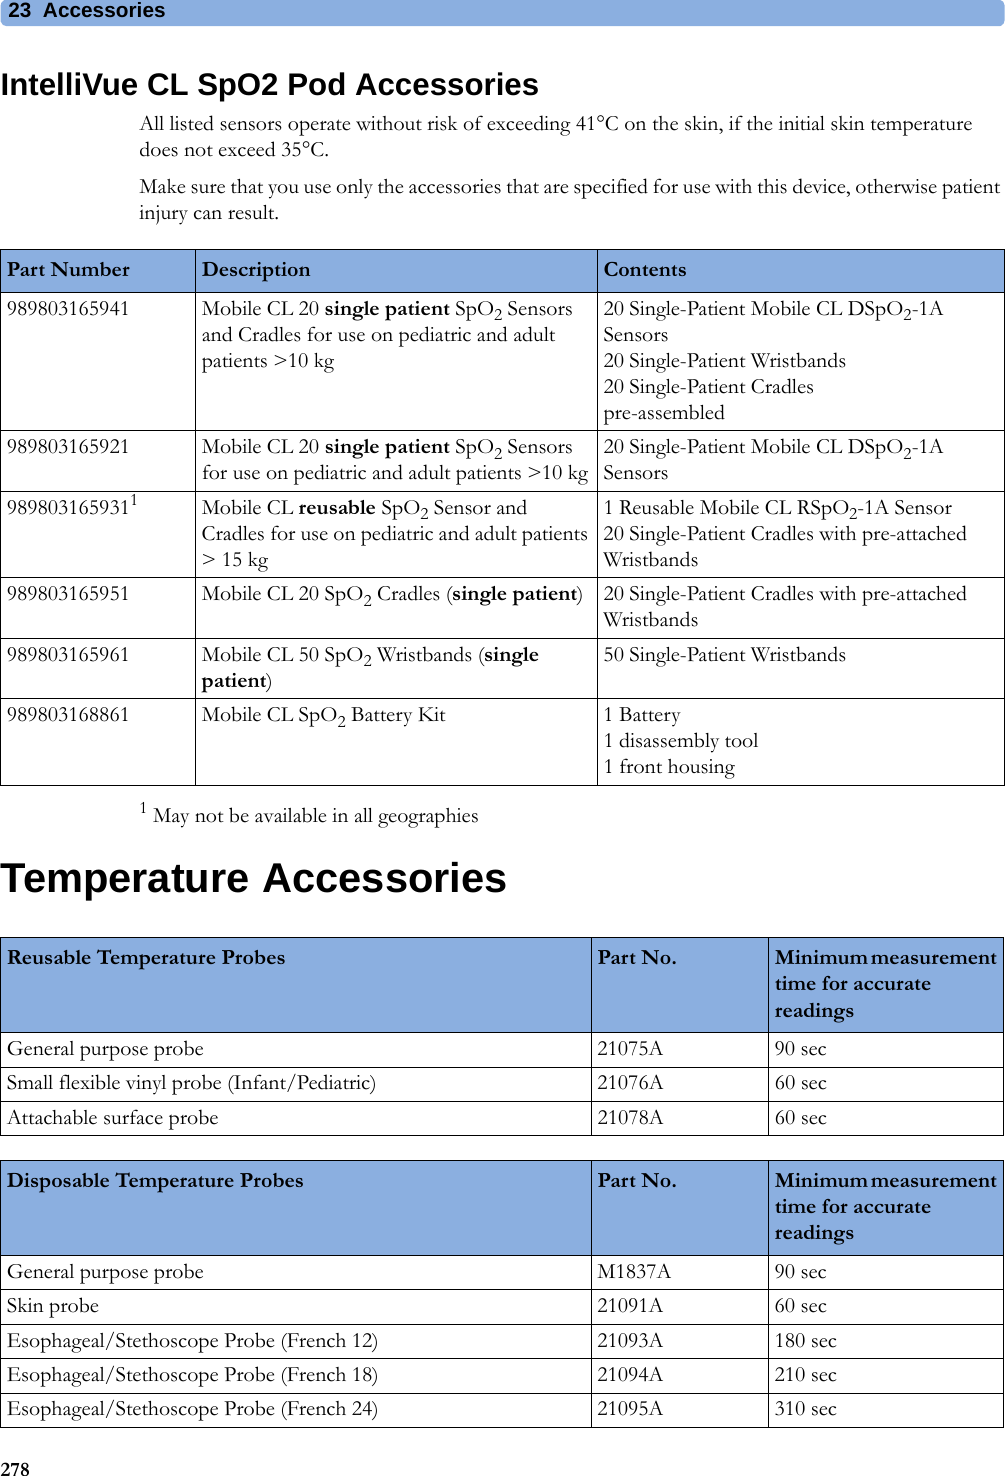 23 Accessories278IntelliVue CL SpO2 Pod AccessoriesAll listed sensors operate without risk of exceeding 41°C on the skin, if the initial skin temperature does not exceed 35°C.Make sure that you use only the accessories that are specified for use with this device, otherwise patient injury can result.1 May not be available in all geographiesTemperature AccessoriesPart Number Description Contents989803165941 Mobile CL 20 single patient SpO2 Sensors and Cradles for use on pediatric and adult patients &gt;10 kg20 Single-Patient Mobile CL DSpO2-1A Sensors20 Single-Patient Wristbands20 Single-Patient Cradlespre-assembled989803165921 Mobile CL 20 single patient SpO2 Sensors for use on pediatric and adult patients &gt;10 kg20 Single-Patient Mobile CL DSpO2-1A Sensors9898031659311Mobile CL reusable SpO2 Sensor and Cradles for use on pediatric and adult patients &gt;15kg1 Reusable Mobile CL RSpO2-1A Sensor20 Single-Patient Cradles with pre-attached Wristbands989803165951 Mobile CL 20 SpO2 Cradles (single patient) 20 Single-Patient Cradles with pre-attached Wristbands989803165961 Mobile CL 50 SpO2 Wristbands (single patient)50 Single-Patient Wristbands989803168861 Mobile CL SpO2 Battery Kit 1 Battery1 disassembly tool1 front housingReusable Temperature Probes Part No. Minimum measurement time for accurate readingsGeneral purpose probe 21075A 90 secSmall flexible vinyl probe (Infant/Pediatric) 21076A 60 secAttachable surface probe 21078A 60 secDisposable Temperature Probes Part No. Minimum measurement time for accurate readingsGeneral purpose probe M1837A 90 secSkin probe 21091A 60 secEsophageal/Stethoscope Probe (French 12) 21093A 180 secEsophageal/Stethoscope Probe (French 18) 21094A 210 secEsophageal/Stethoscope Probe (French 24) 21095A 310 sec